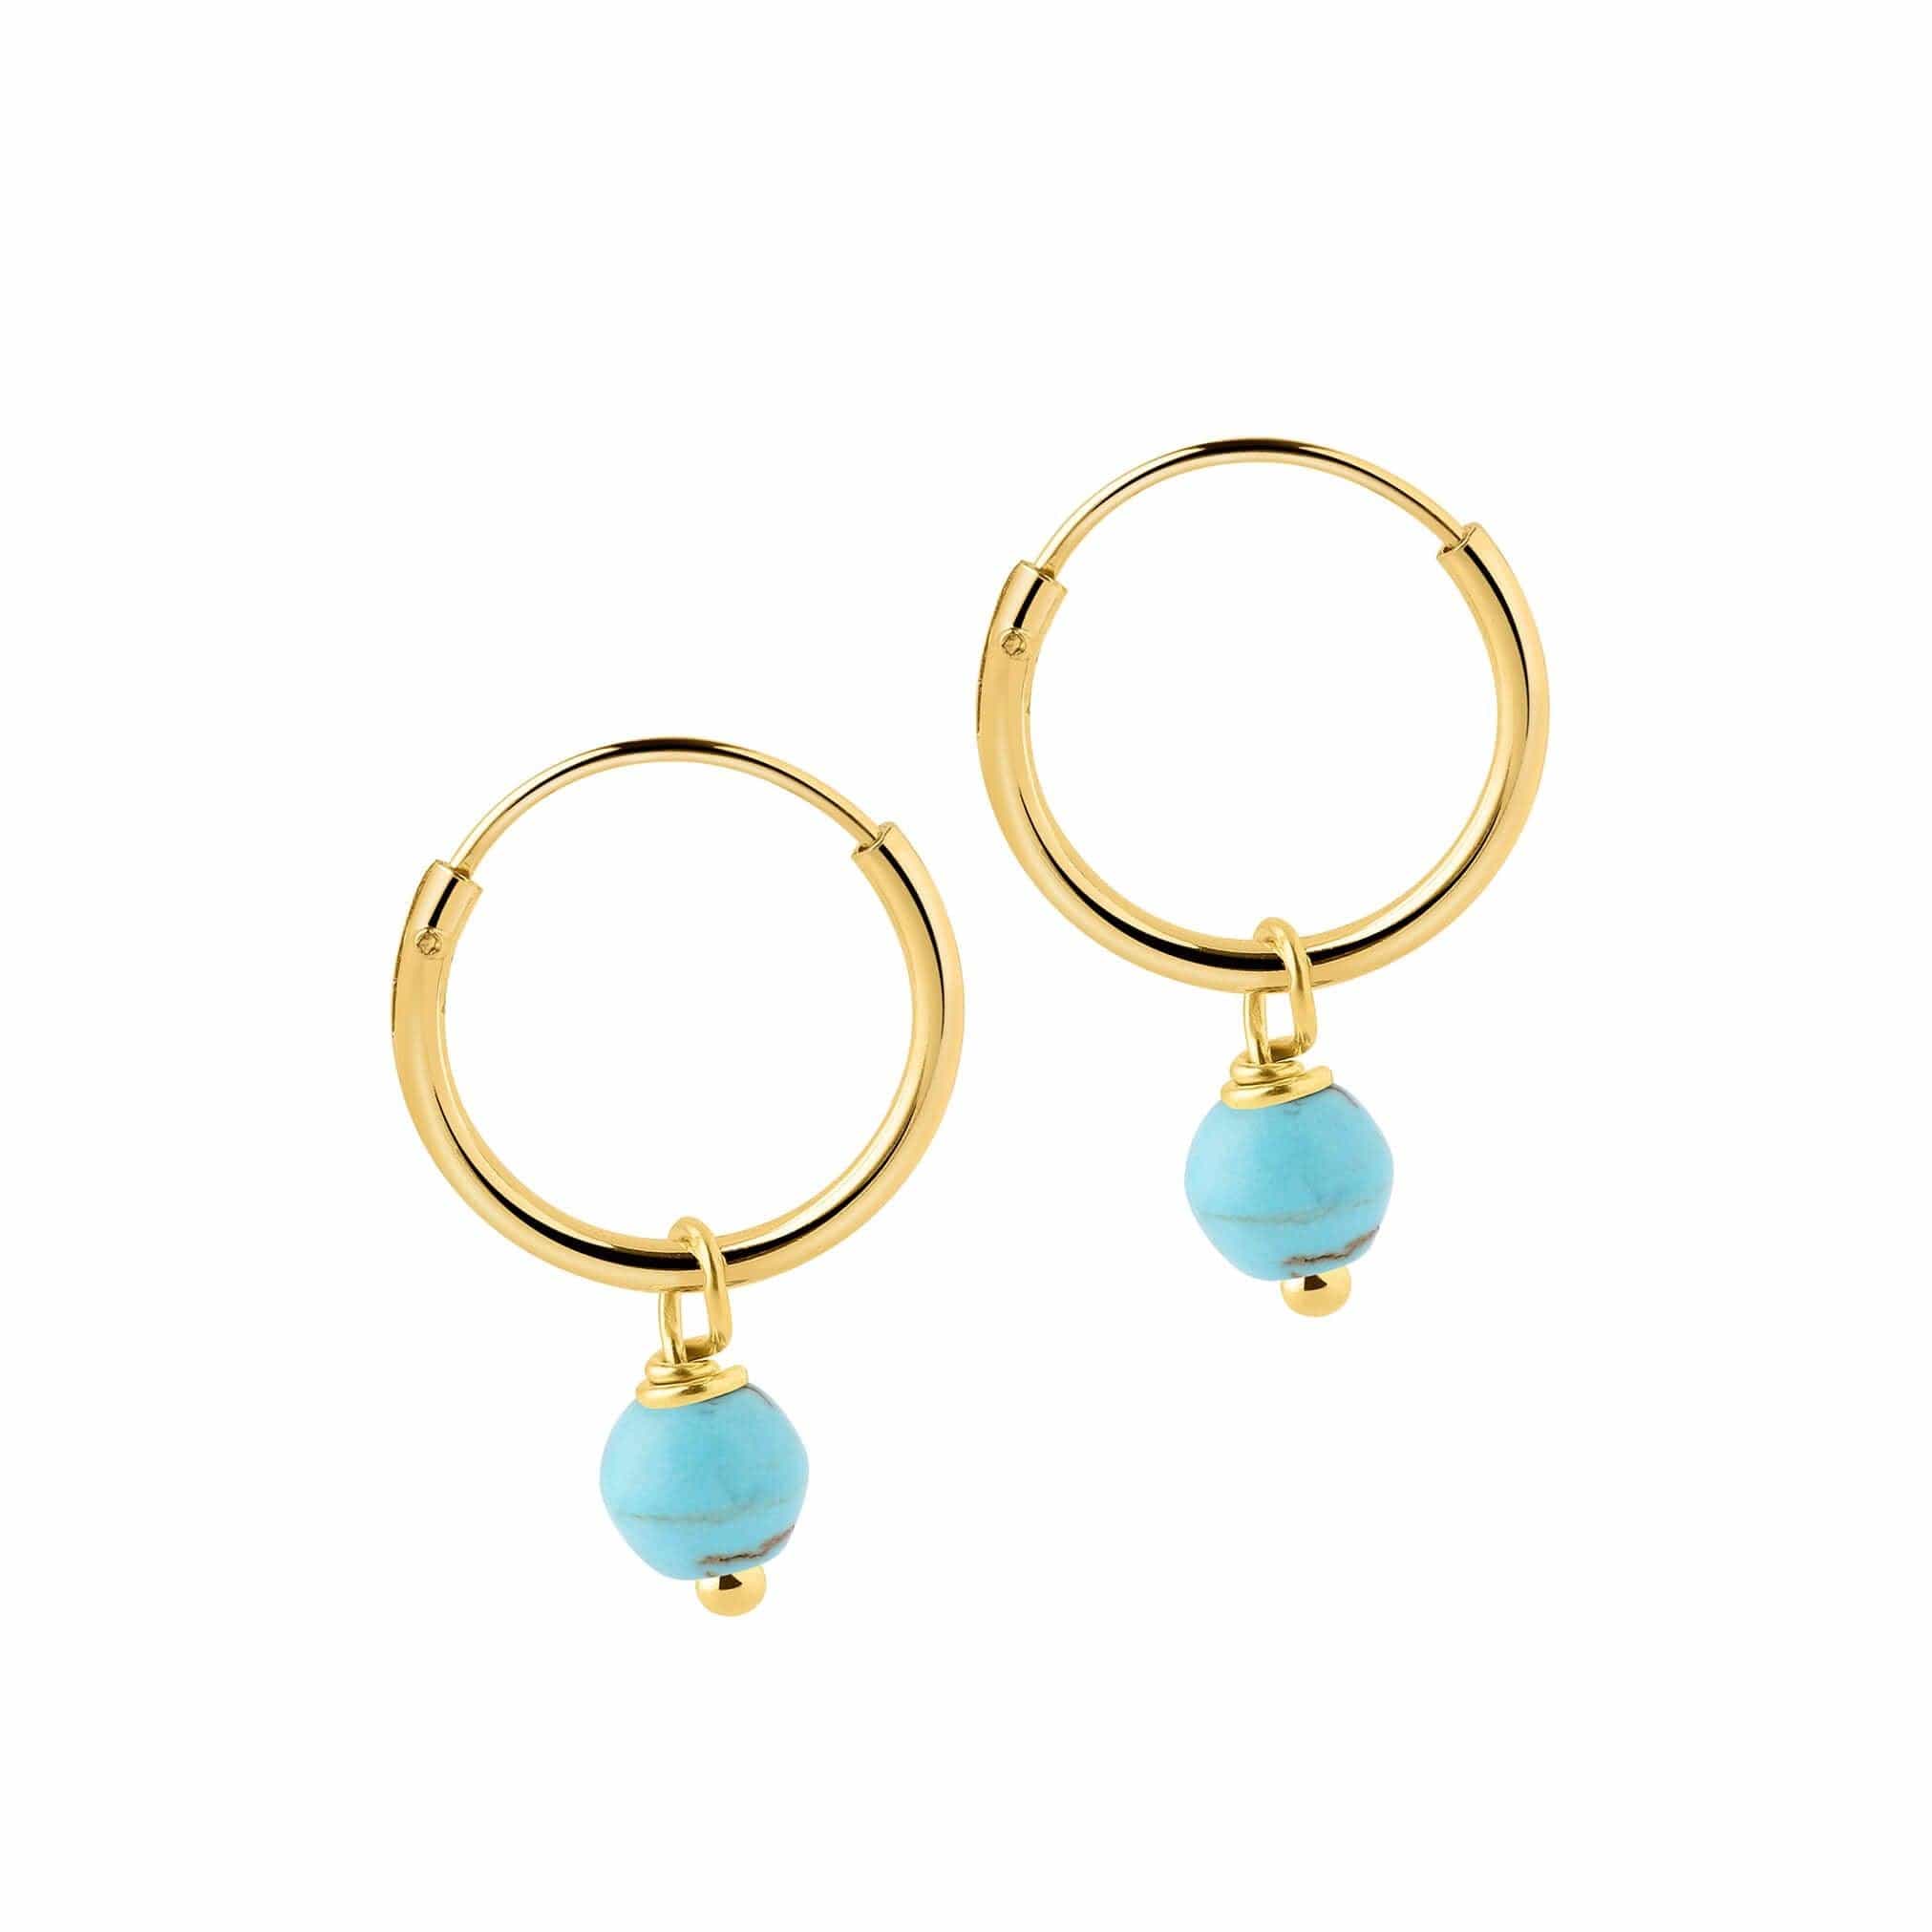 Small Gold Plated Hoop Earrings Turquoise Blue Stone